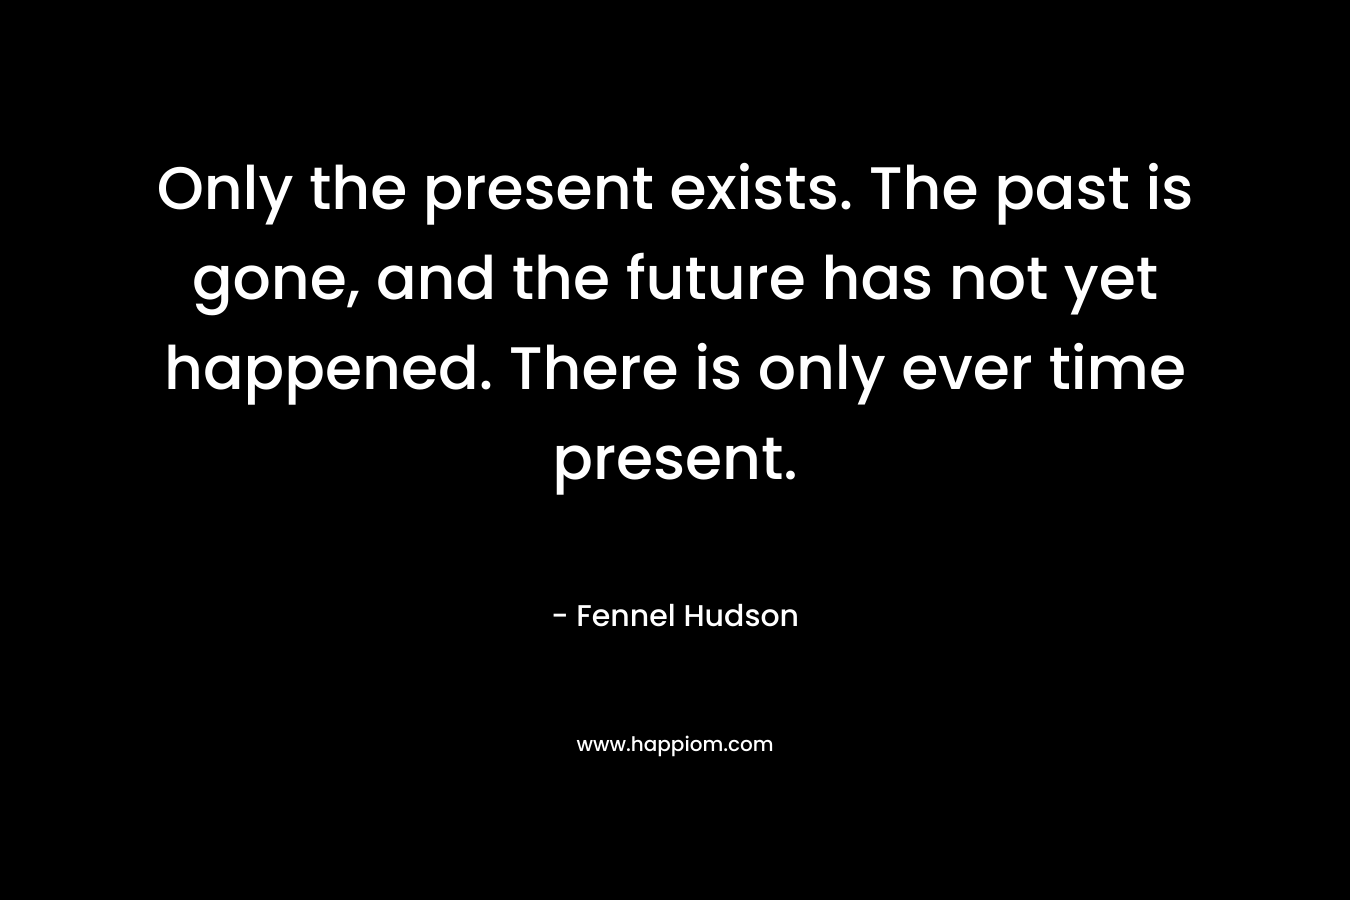 Only the present exists. The past is gone, and the future has not yet happened. There is only ever time present.